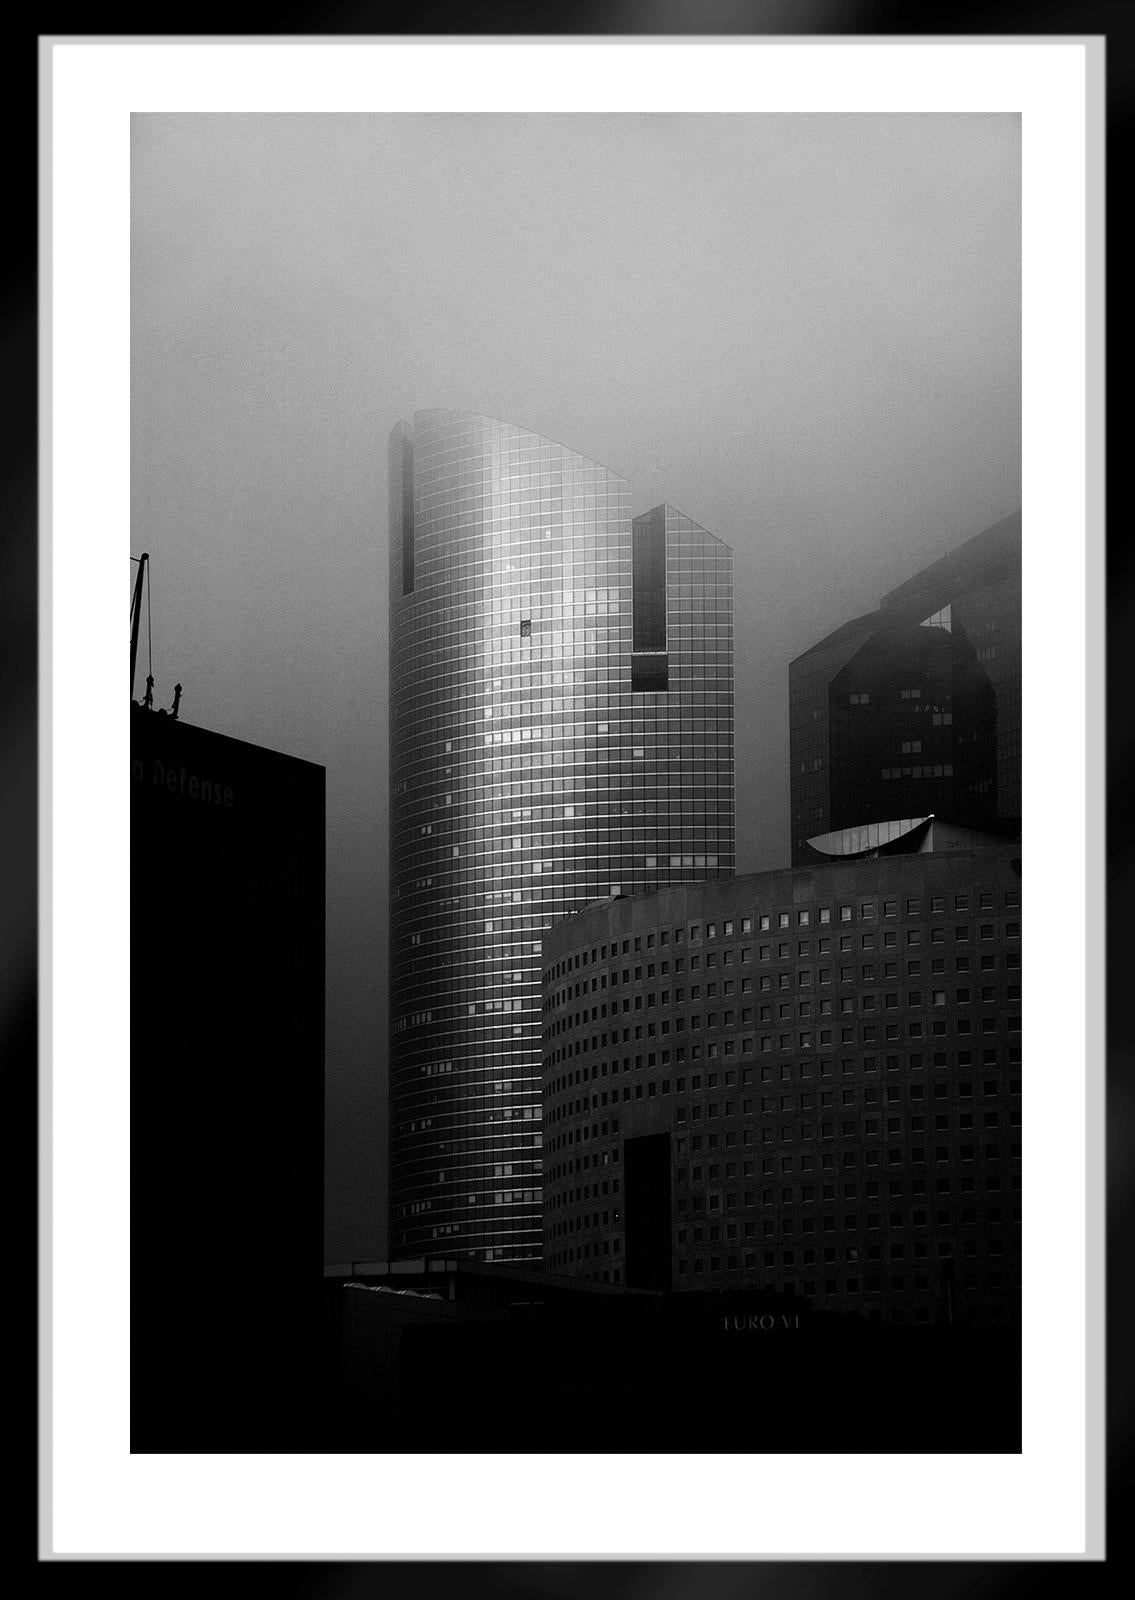 La Défense 2   -  Signed limited edition archival pigment print,  2004   -  Edition of 5

This is an Archival Pigment print on fiber based paper ( Hahnemühle Photo Rag® Baryta 315 gsm , Acid- and lignin-free paper, Museum quality for highest age